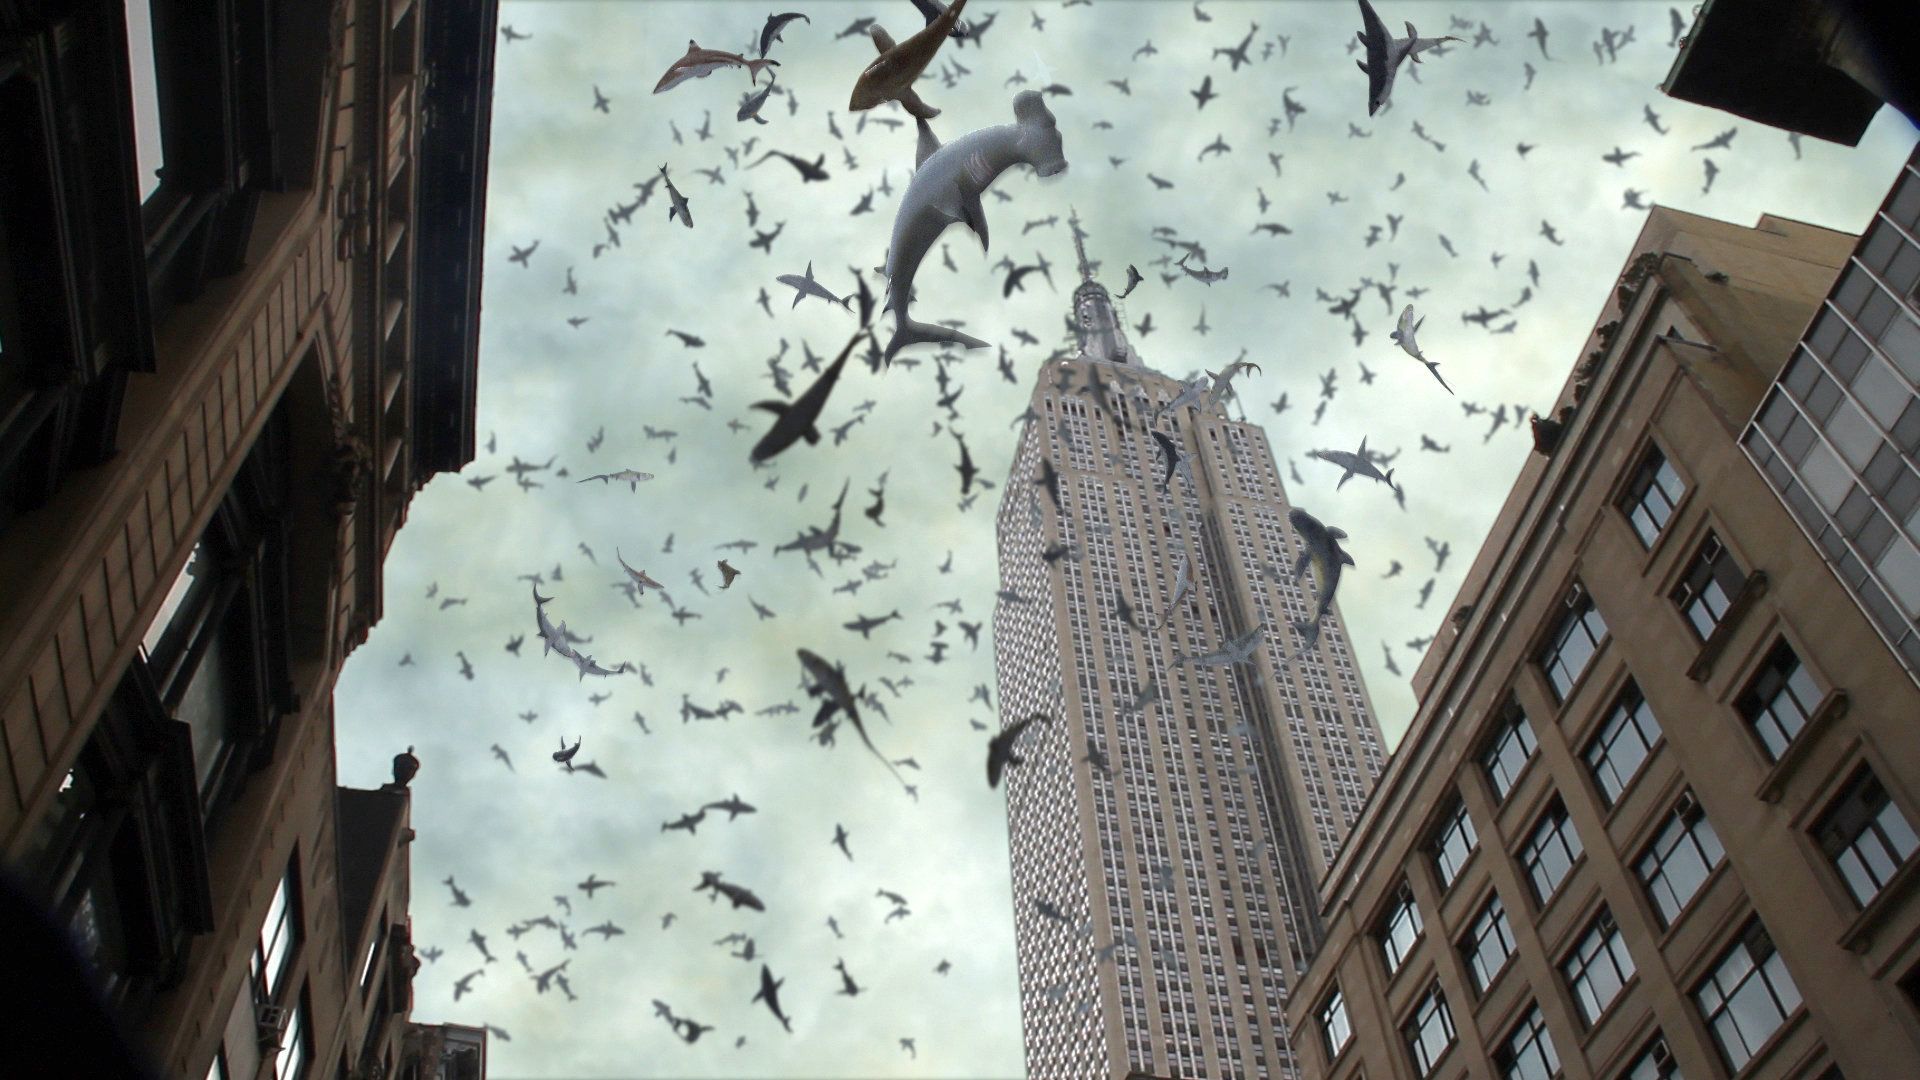 Sharknado 2: The Second One background